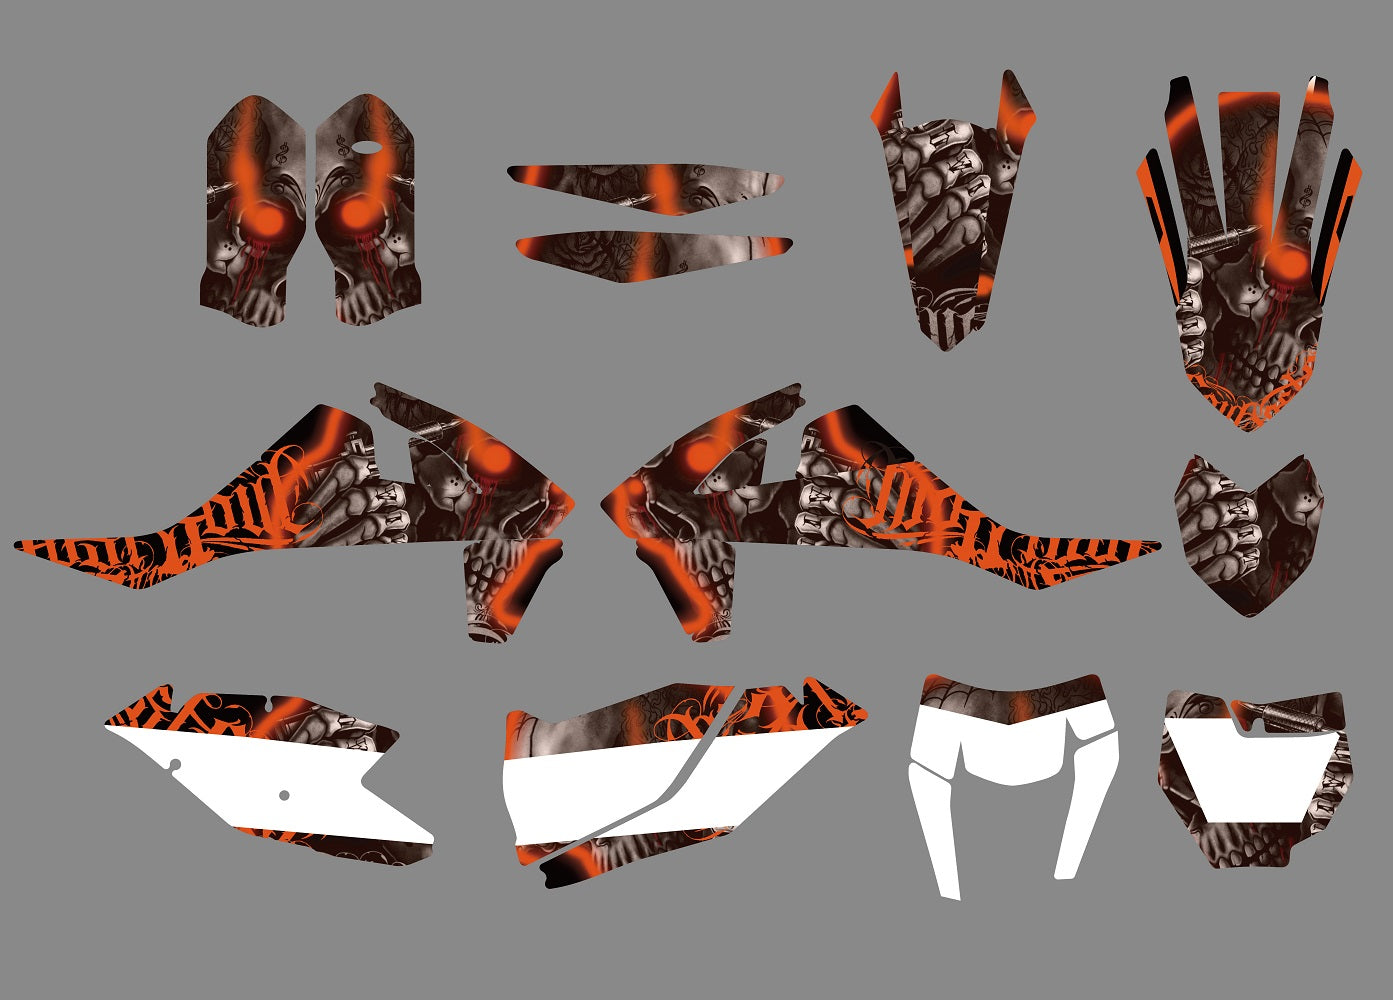 Full Graphic Decals Stickers Kits For KTM SX SXF 125-450 2016-2018